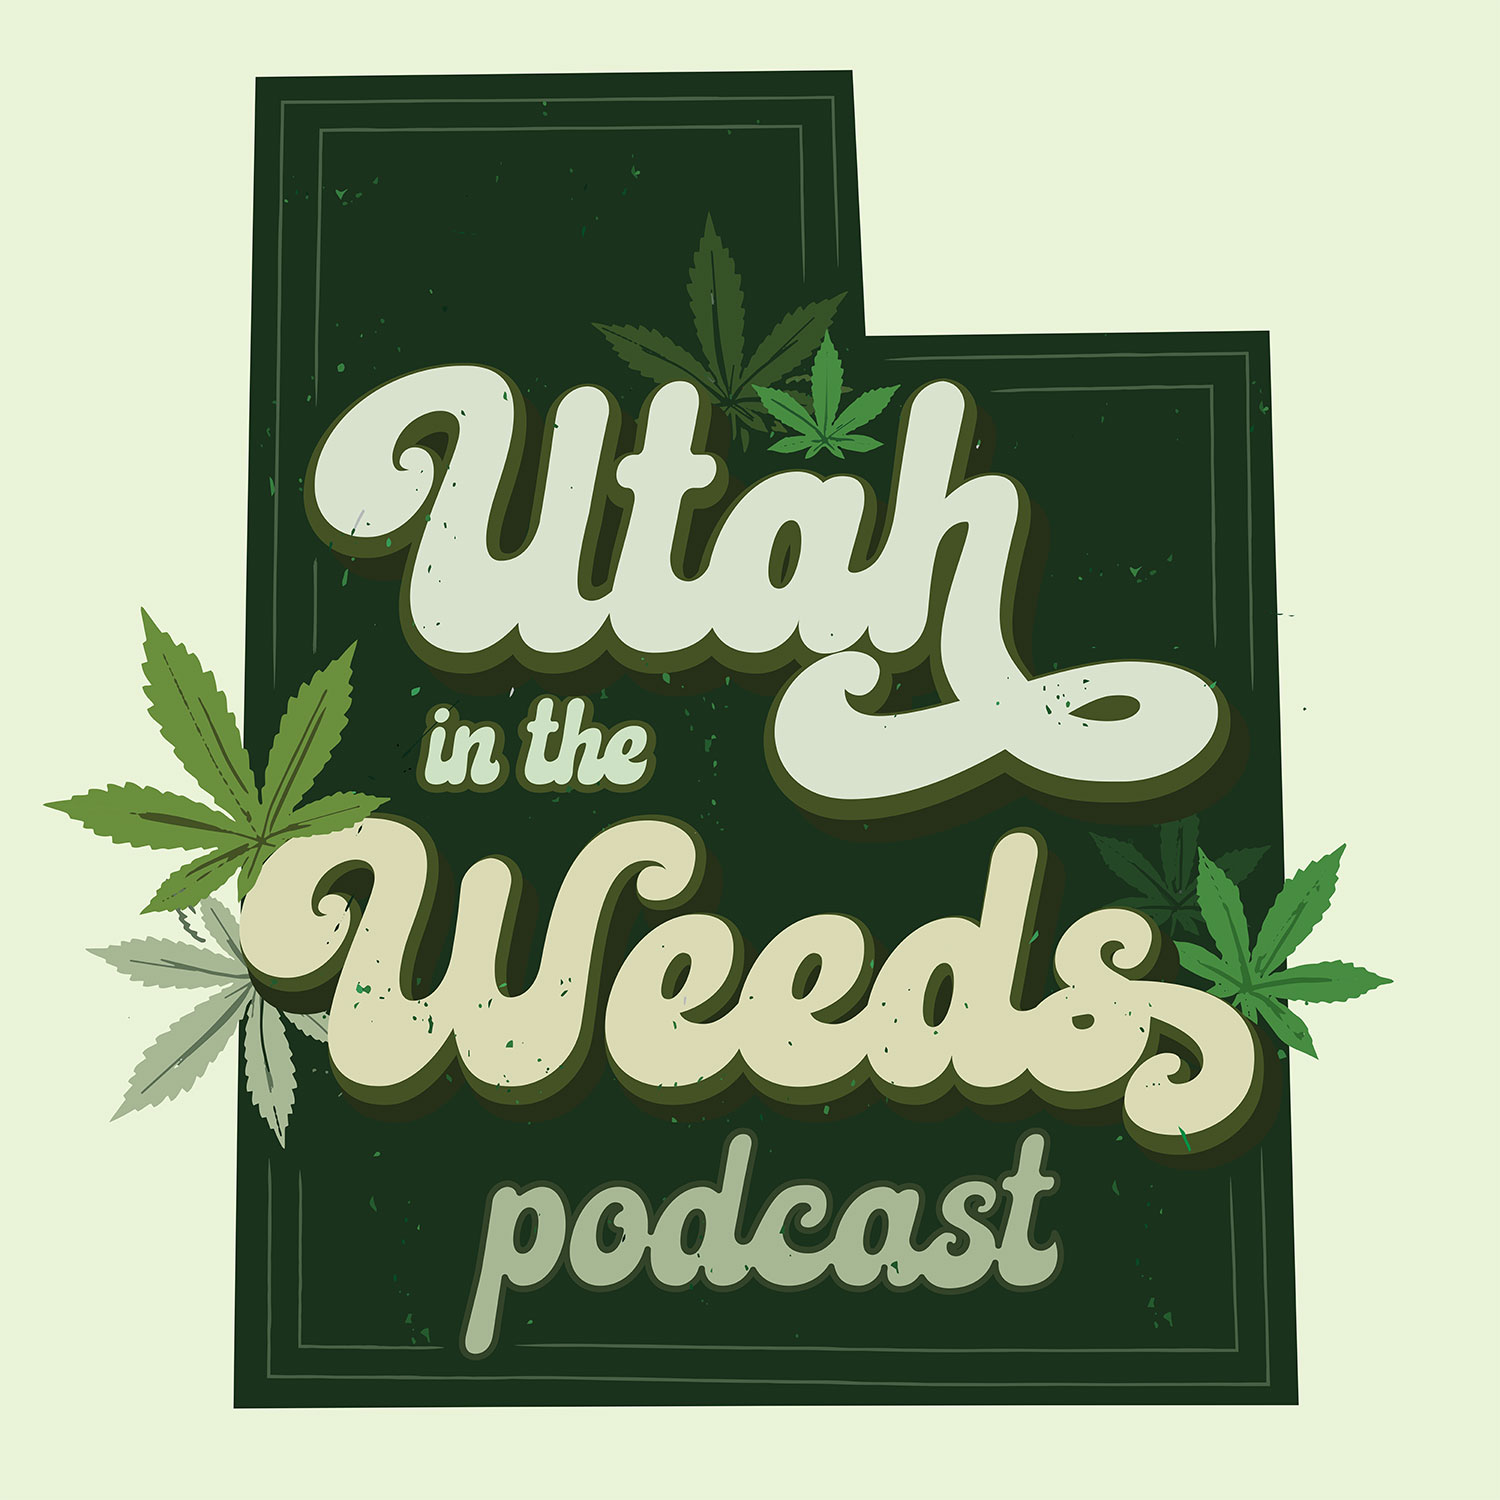 Show artwork for Utah in the Weeds